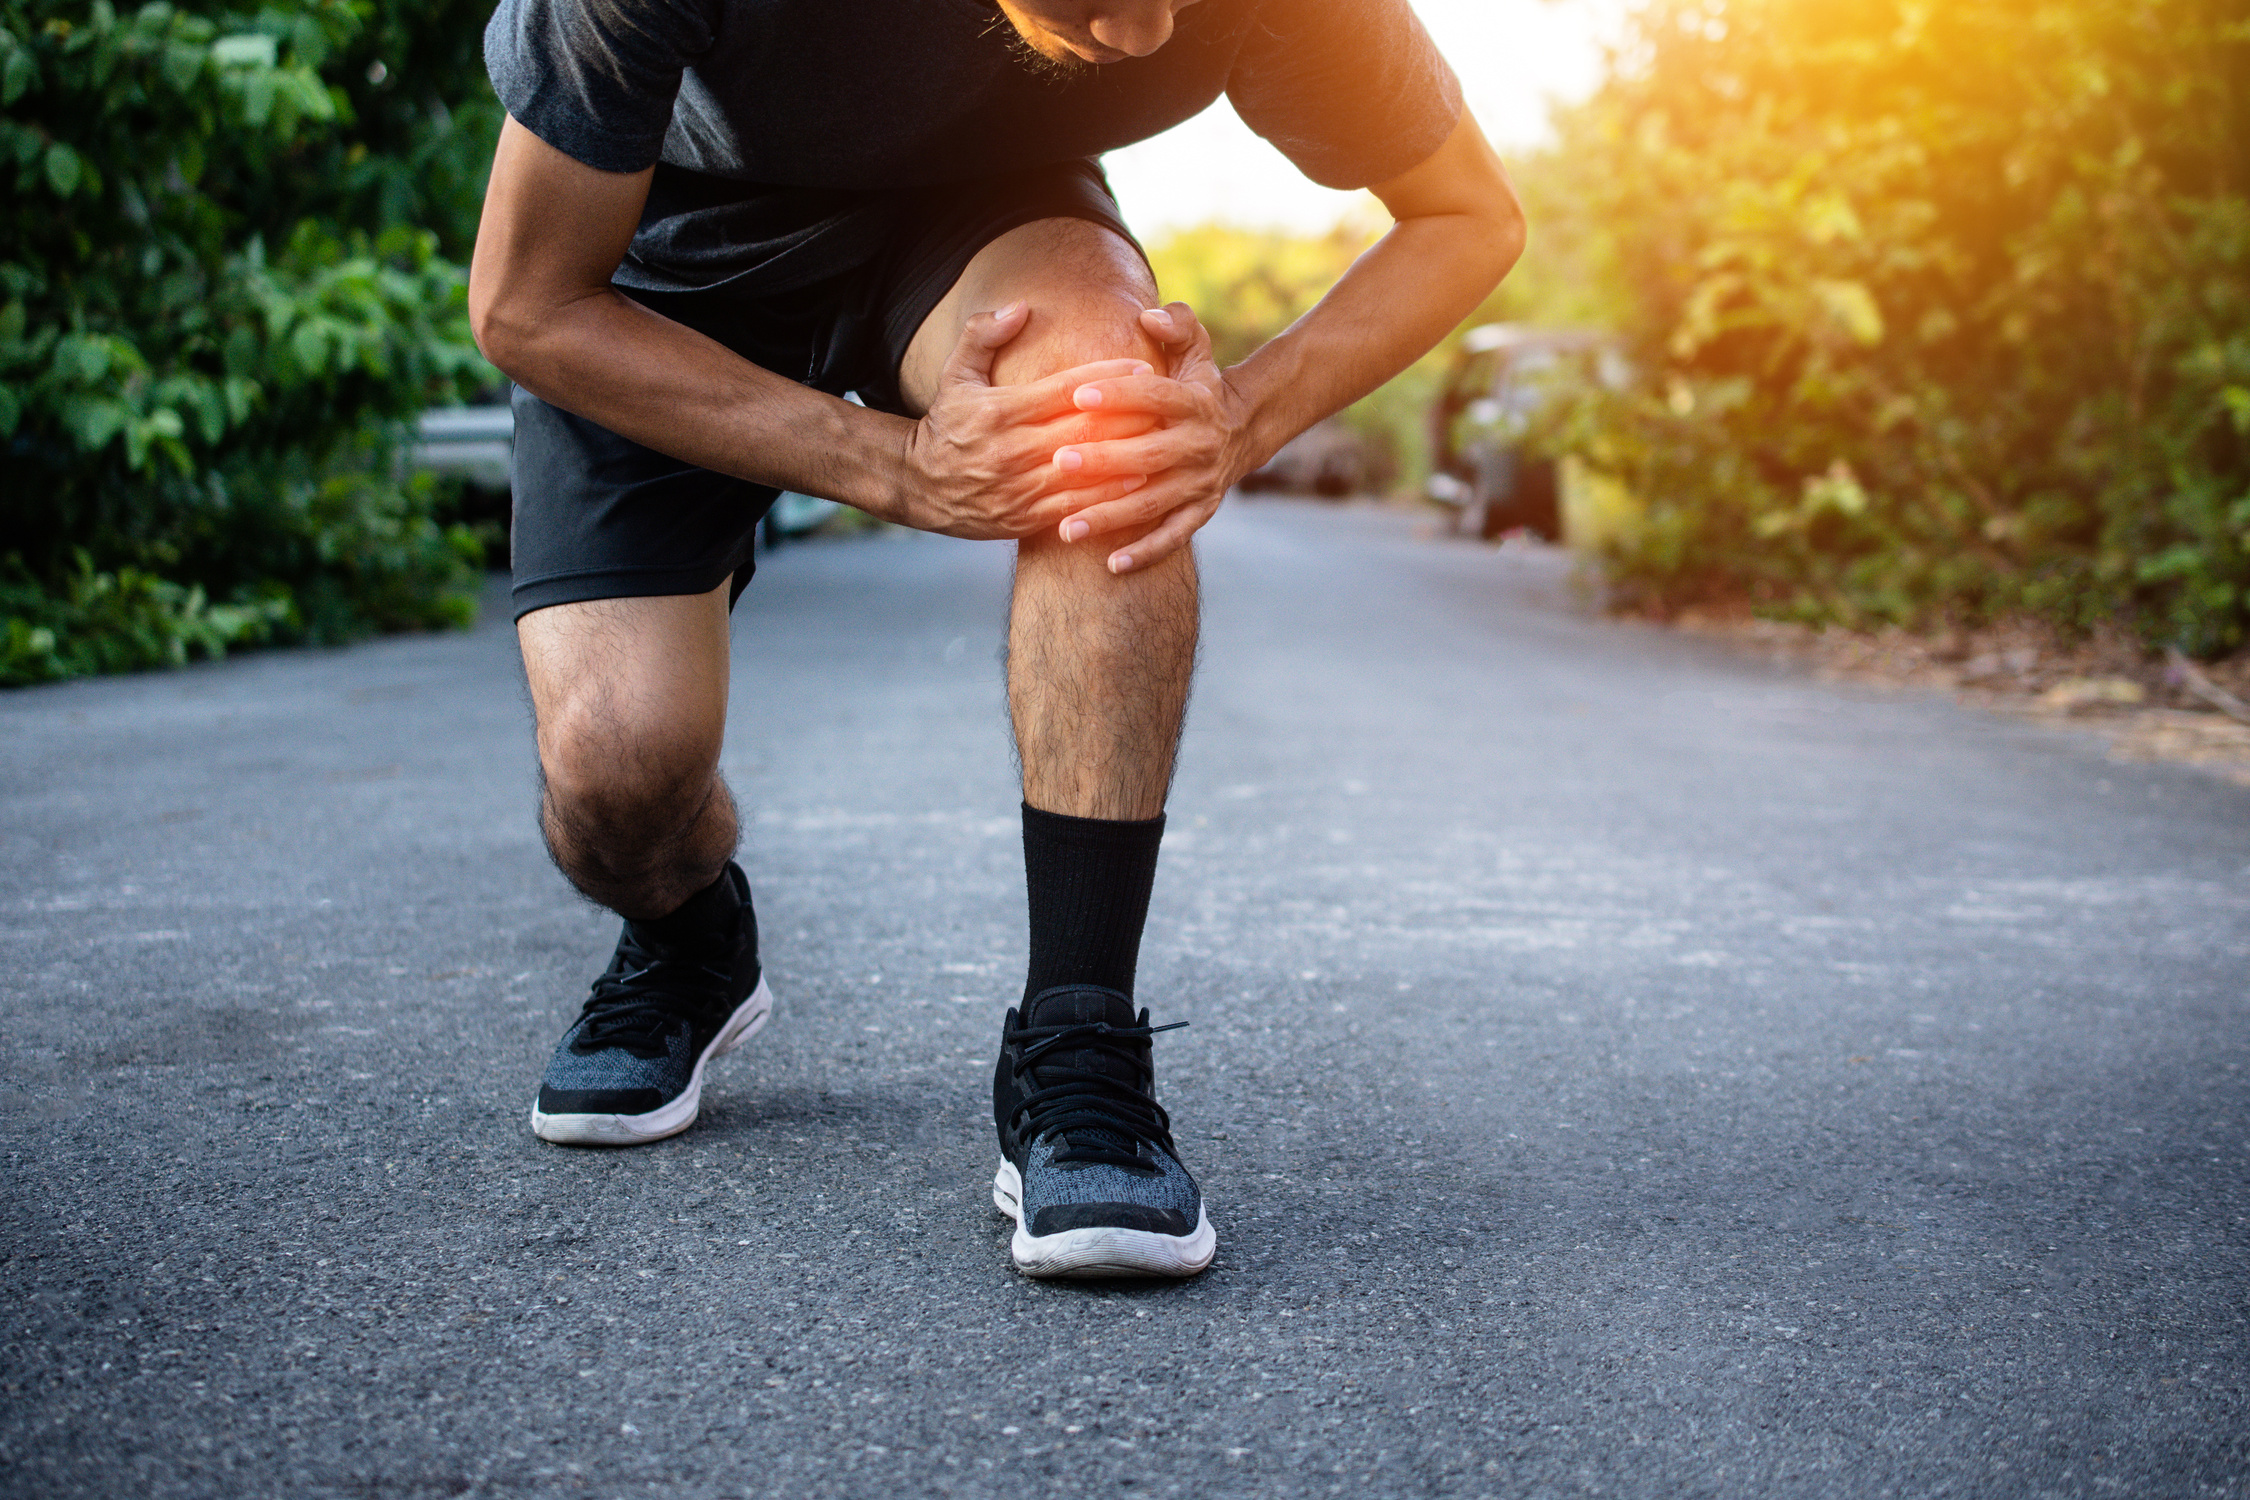 Men with Knee Pain While Jogging